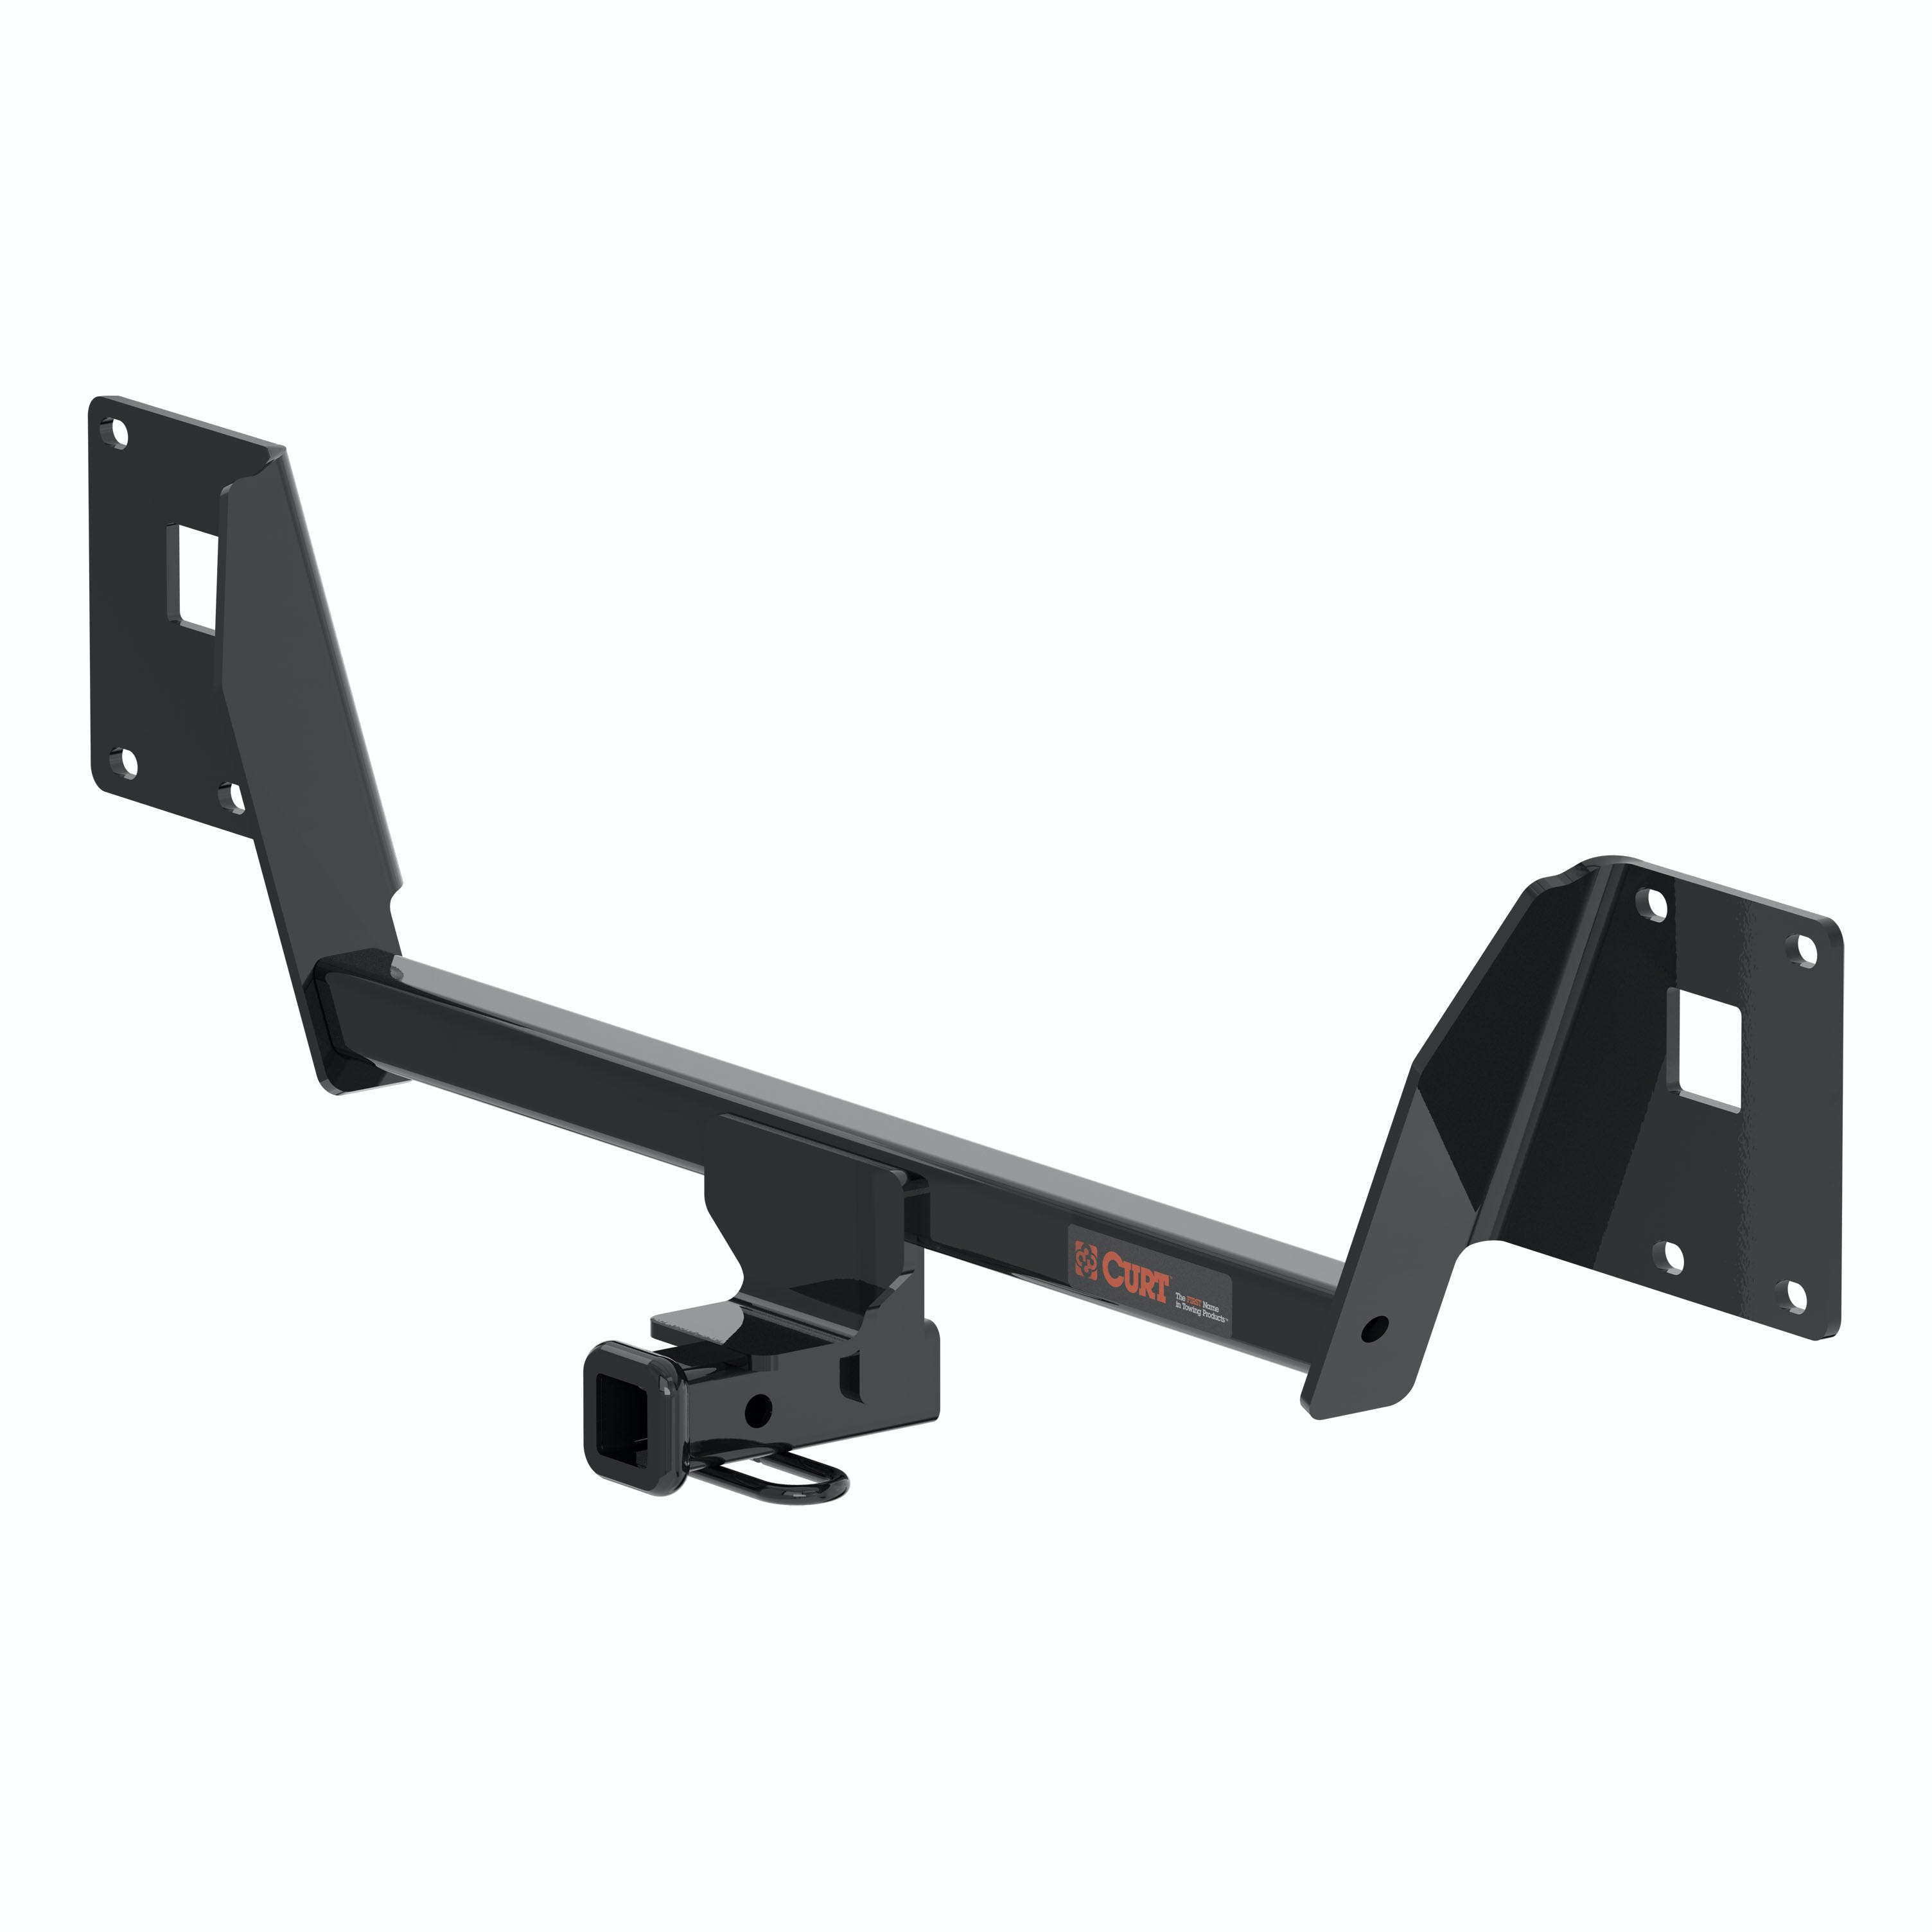 CURT 11564 Class 1 Hitch, 1-1/4 Receiver, Select Volkswagen Golf R (Concealed Main Body)